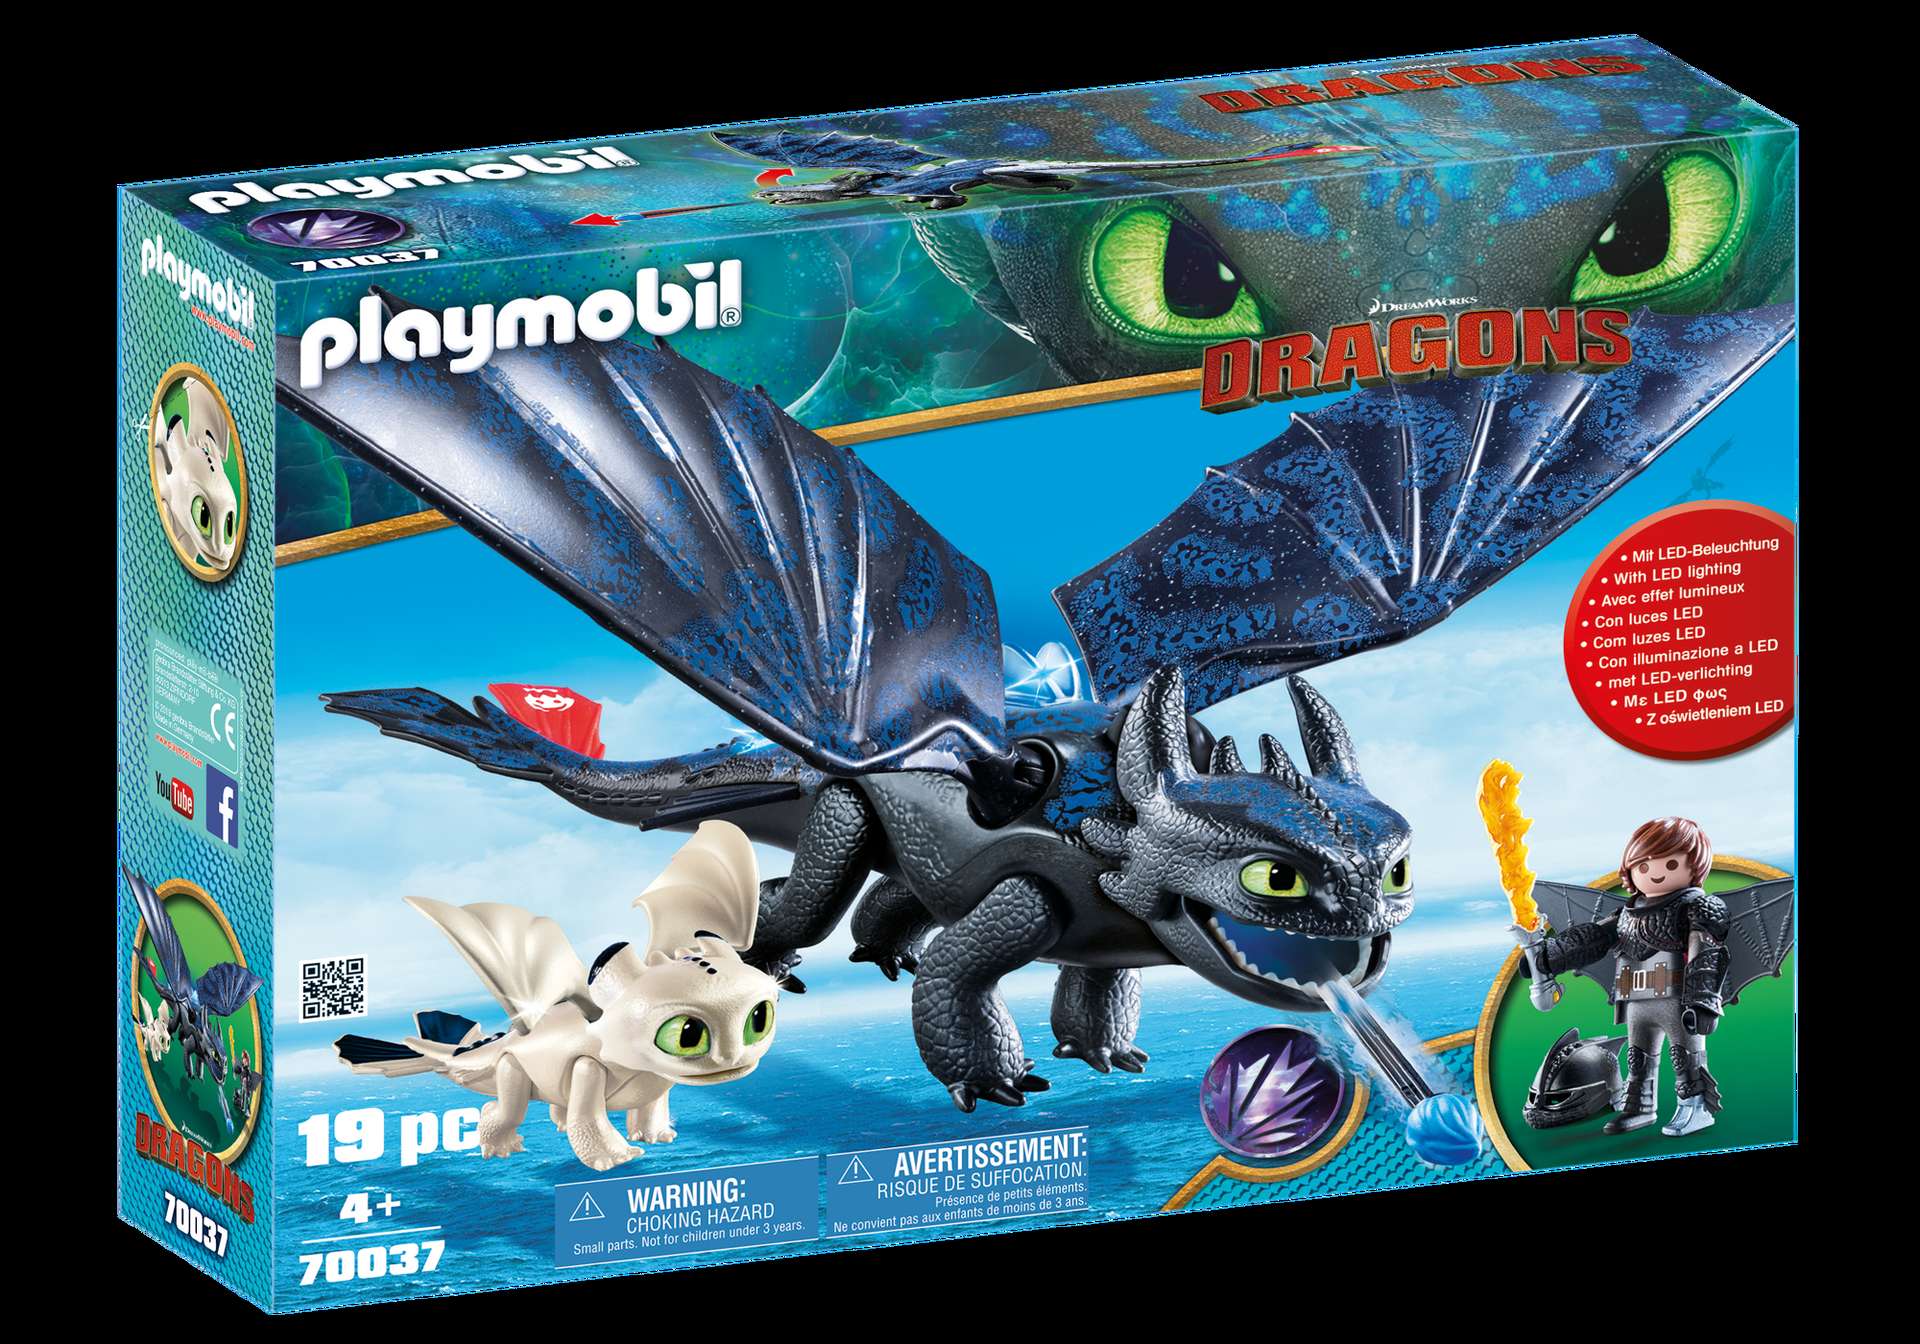 Playmobil - Hiccup and Toothless Playset (70037)